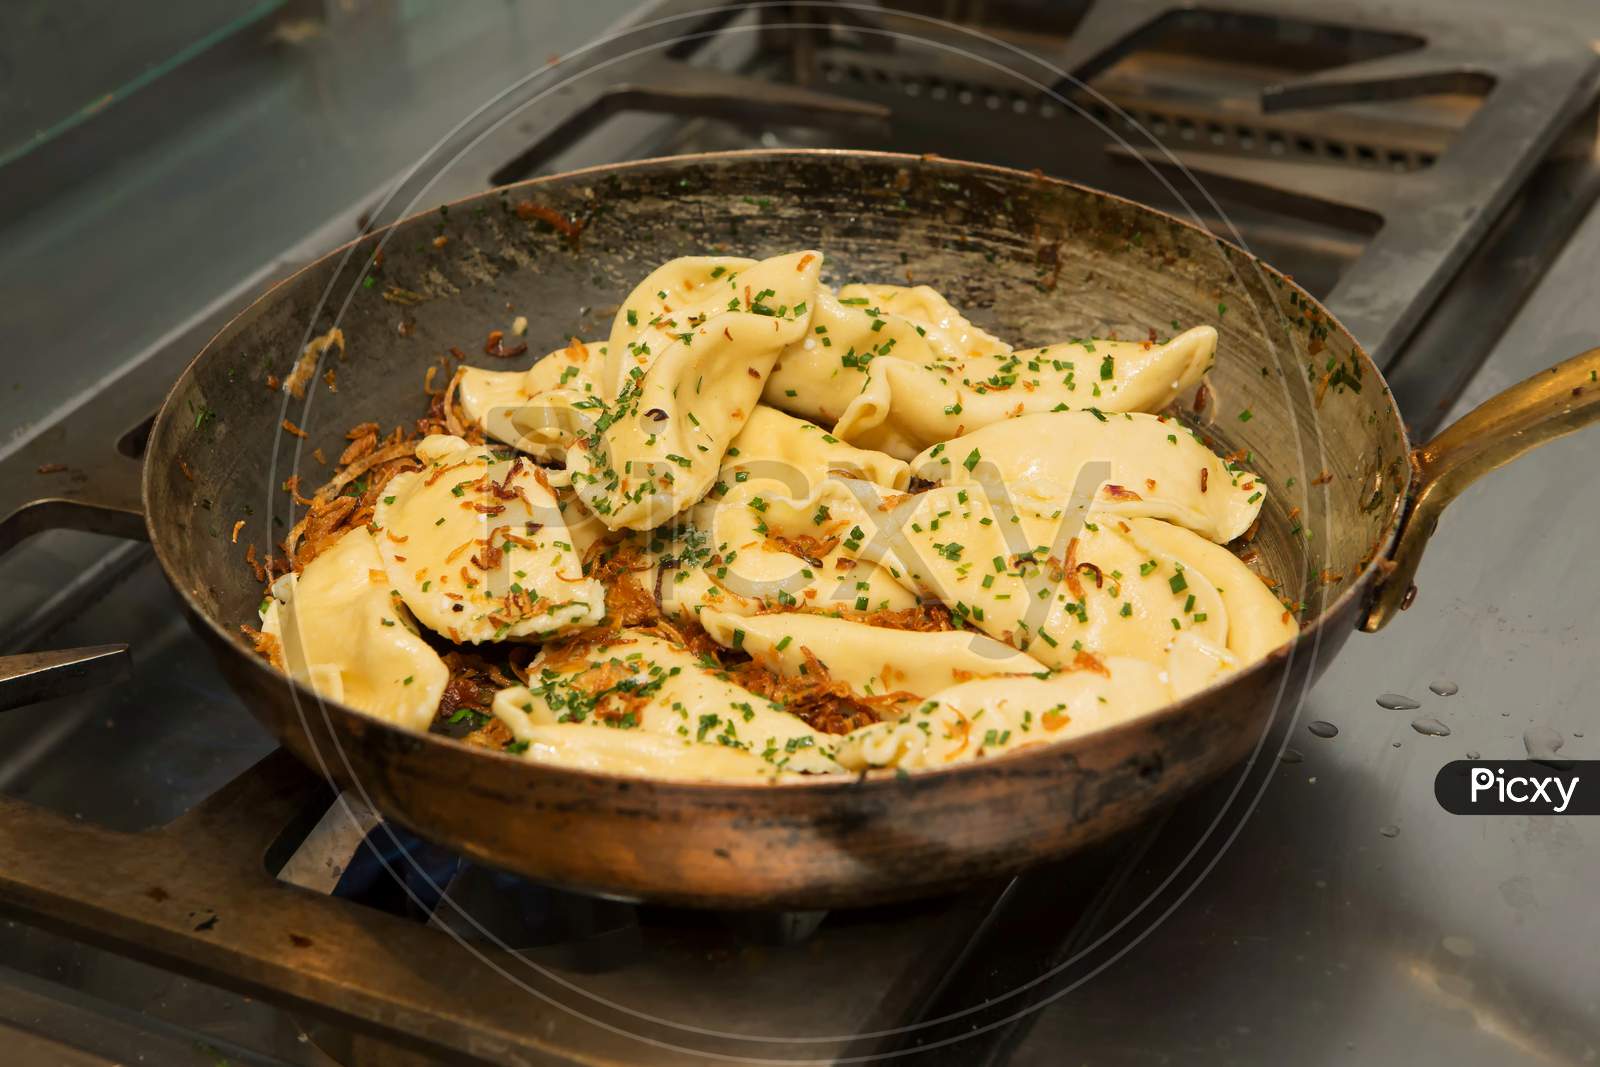 Varenyky Or Pierogi Casseroles Are On Cooking Process